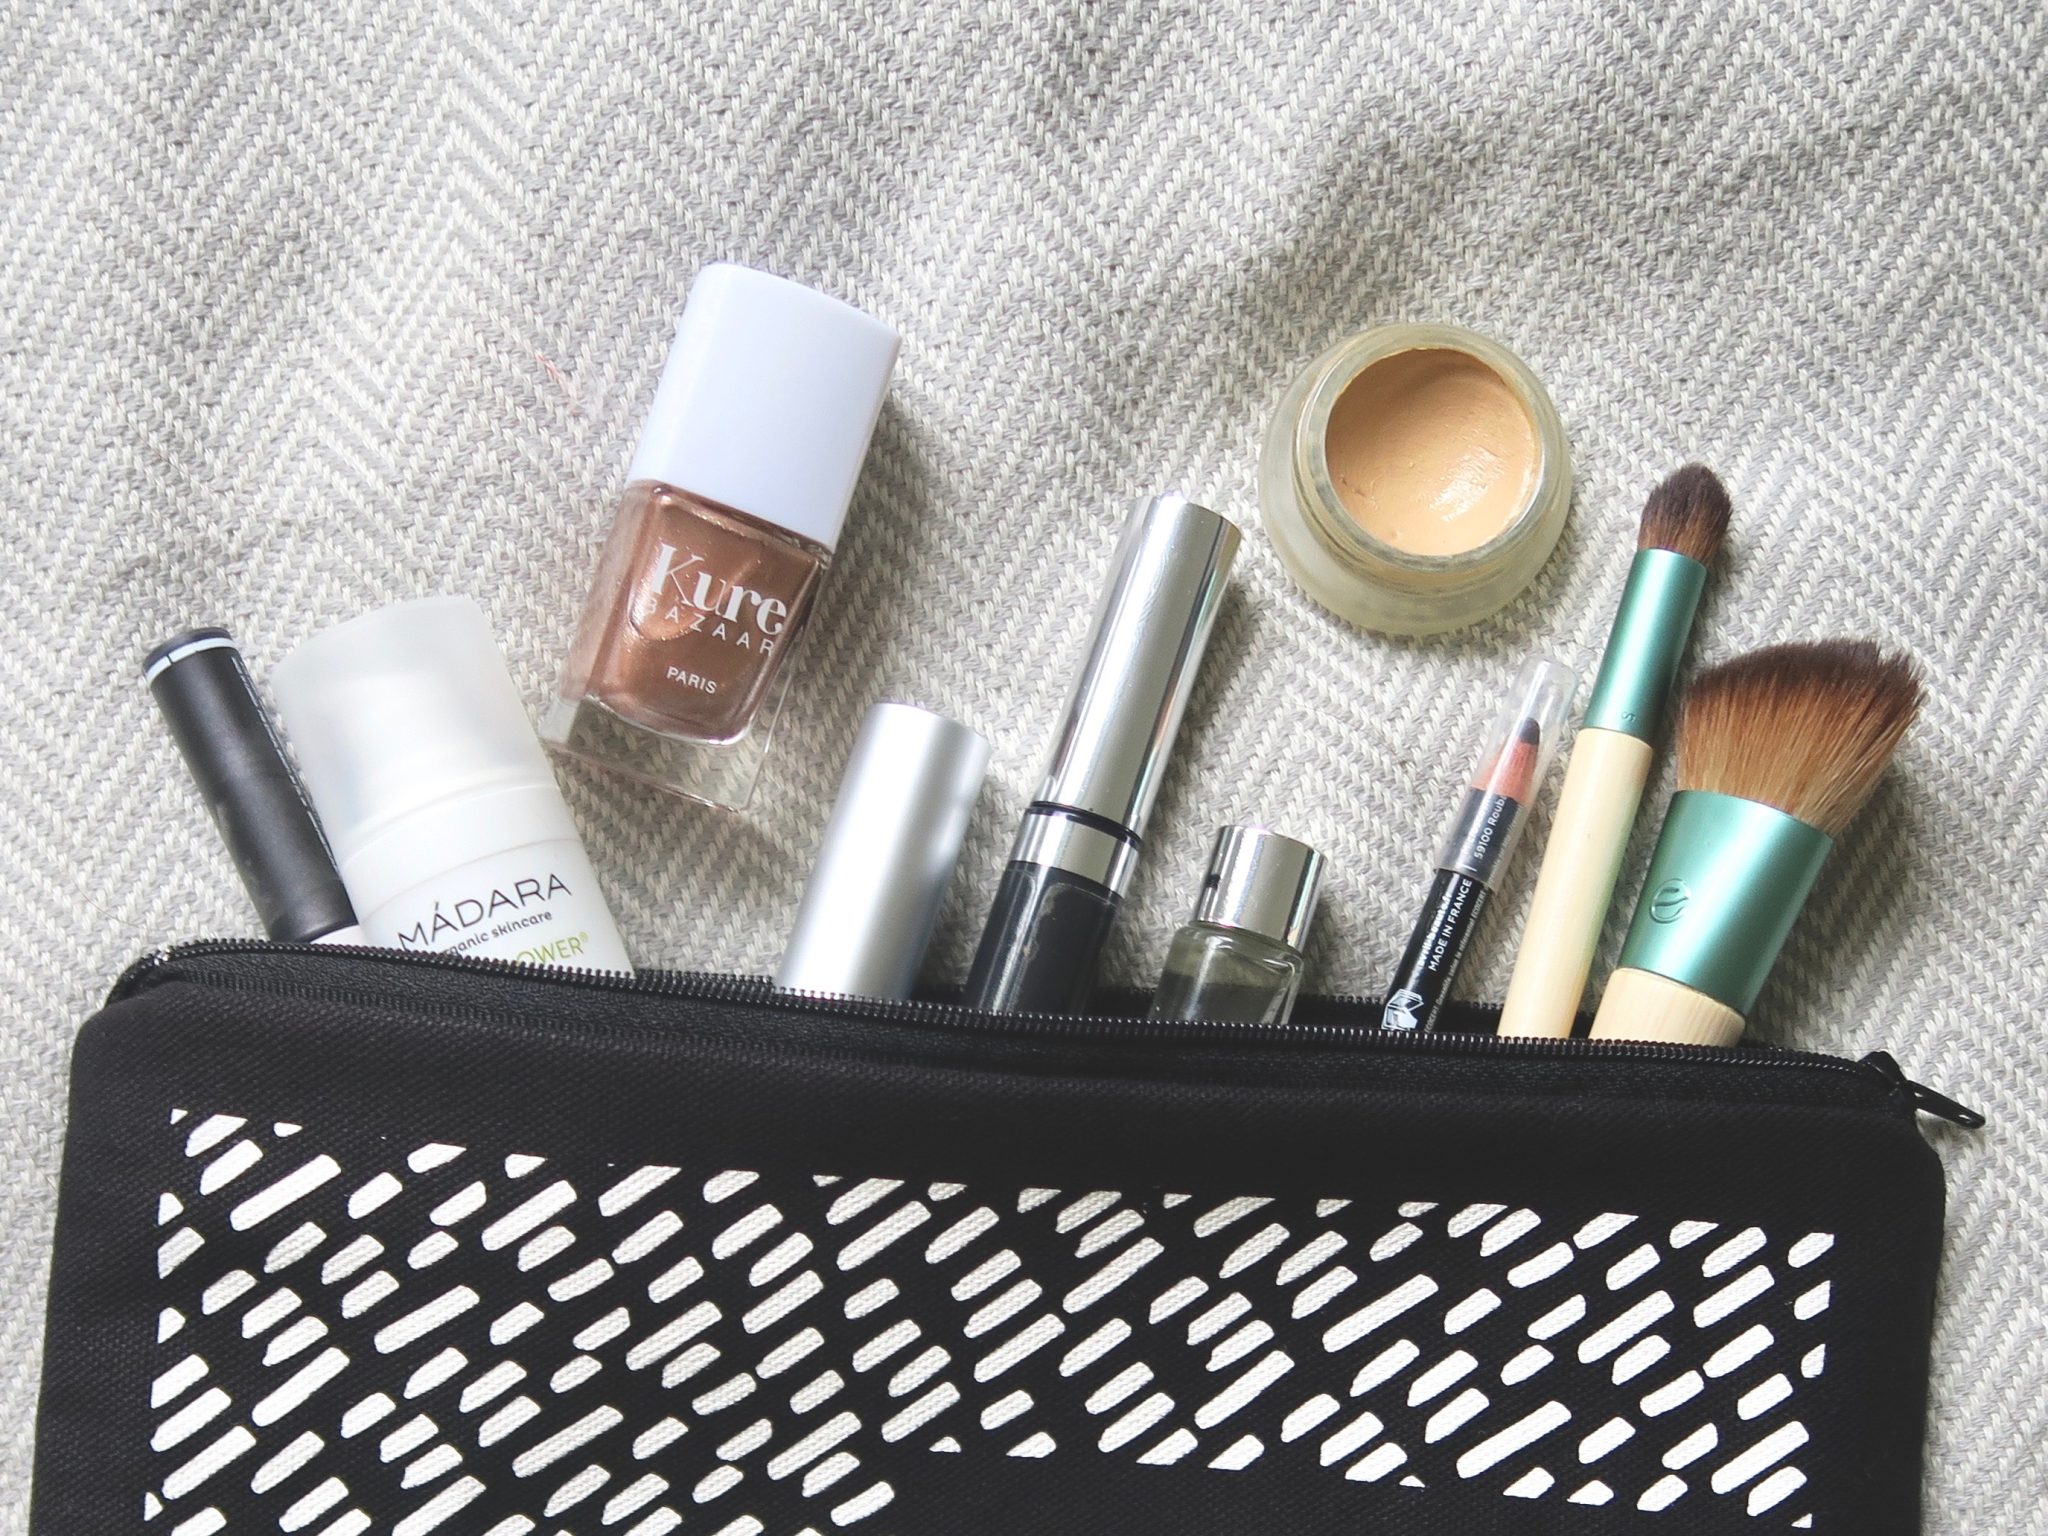 What's in My Makeup Bag? | Curiously Conscious